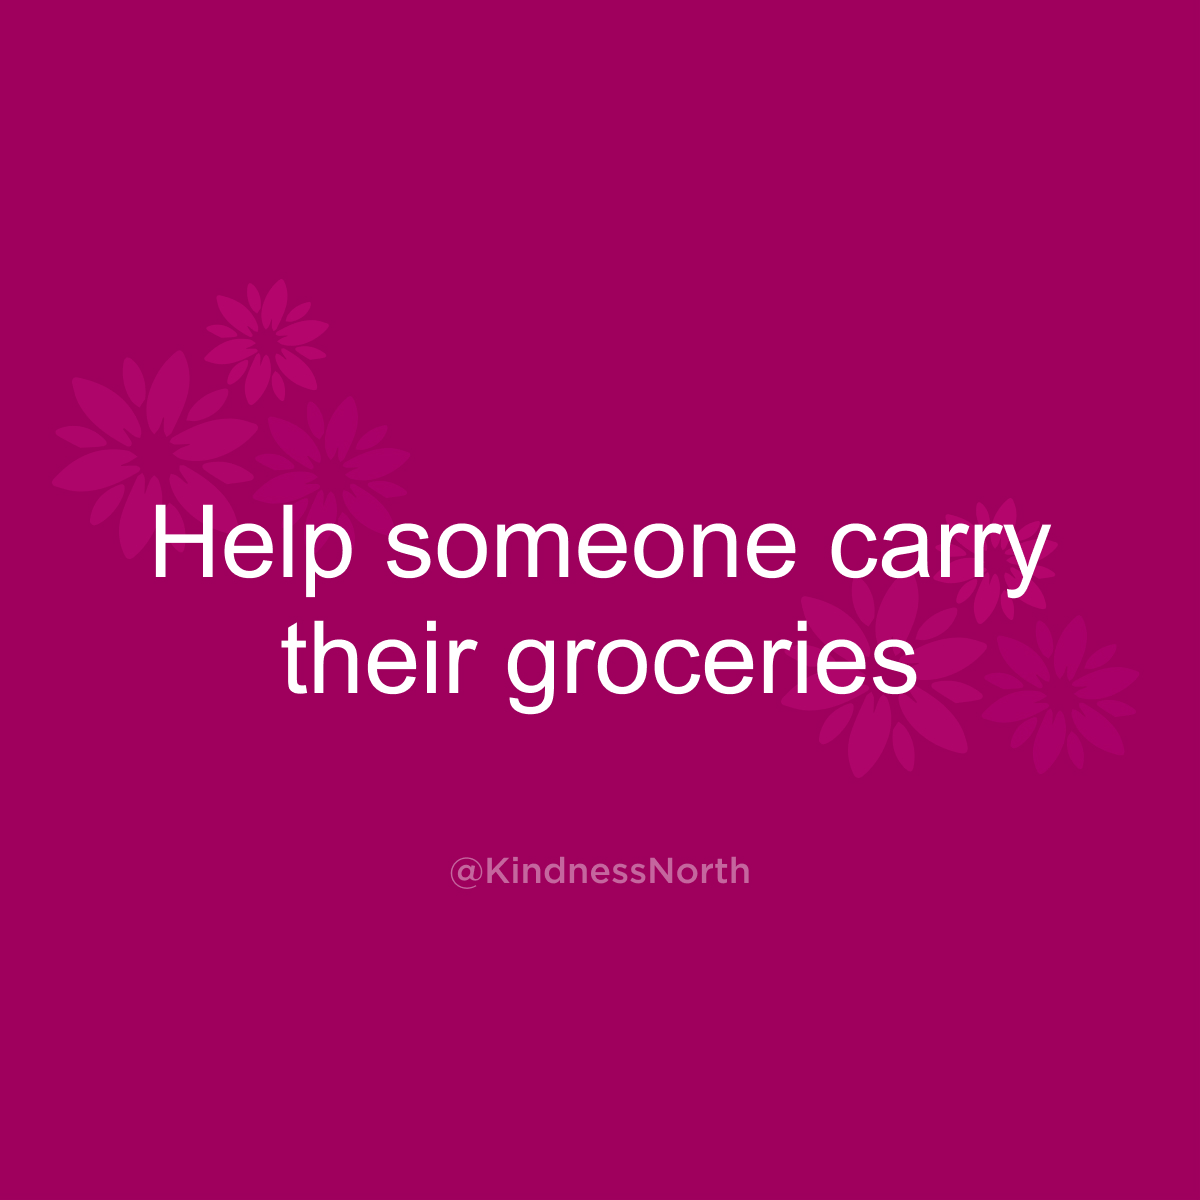 Help someone carry their groceries